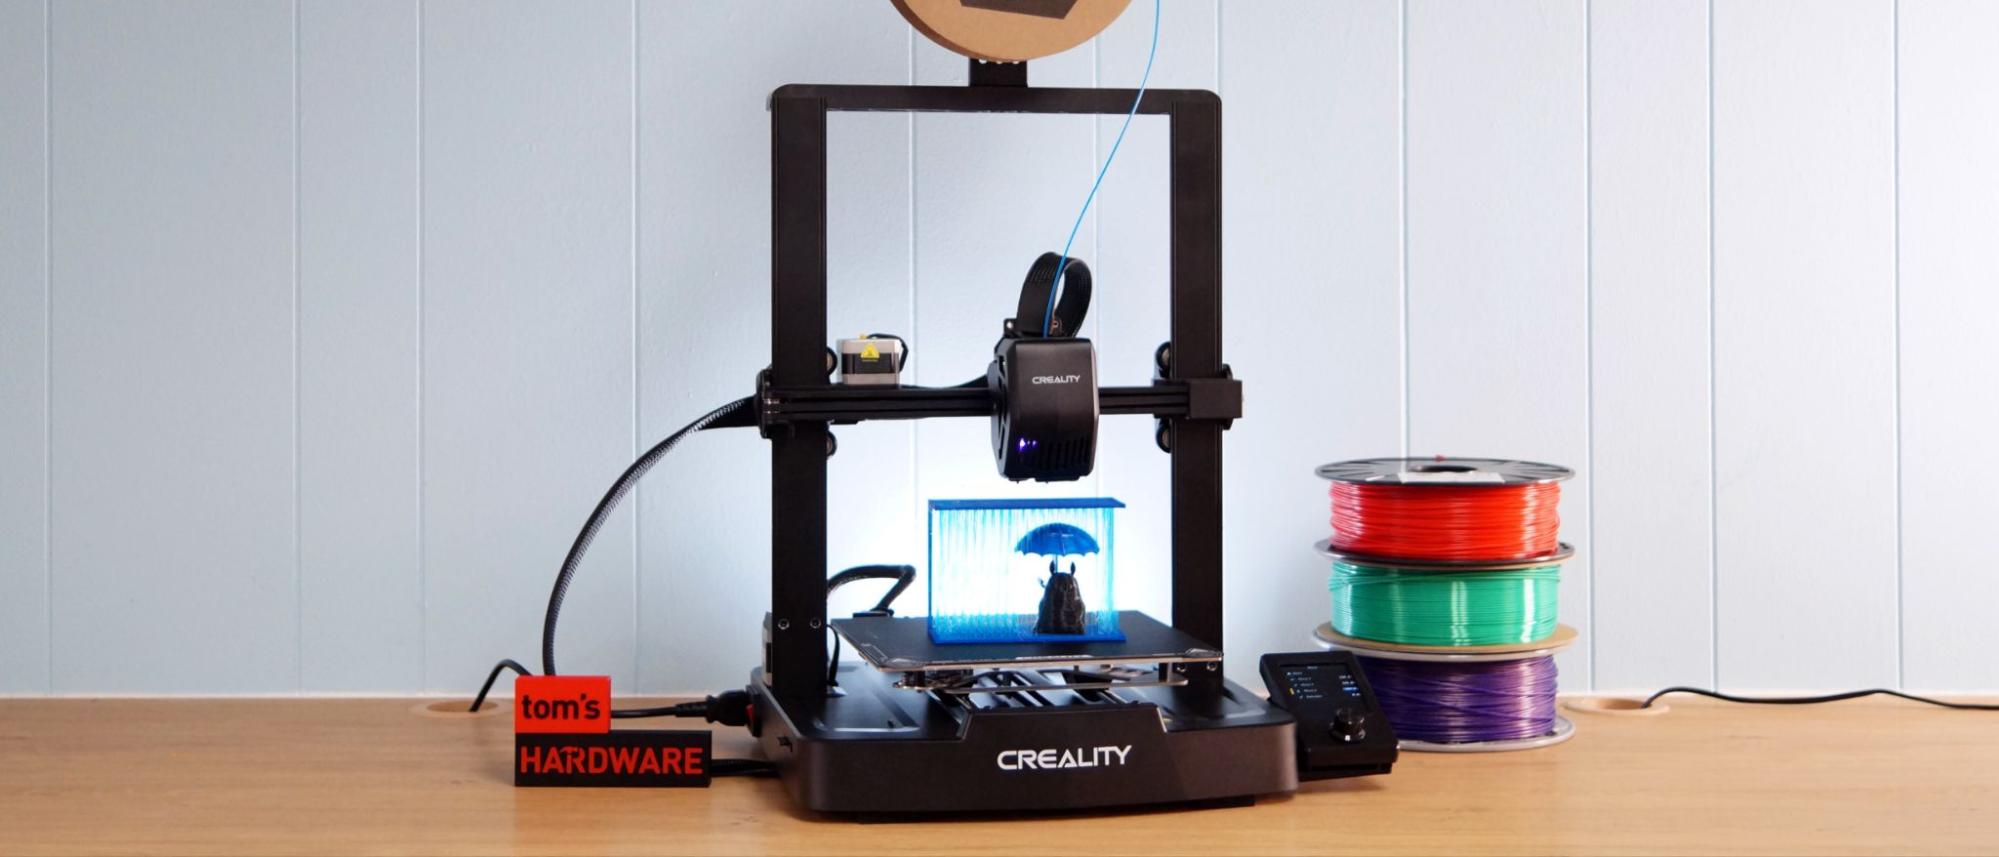 Creality Ender 3 S1 Pro Review: The Ultimate Ender 3